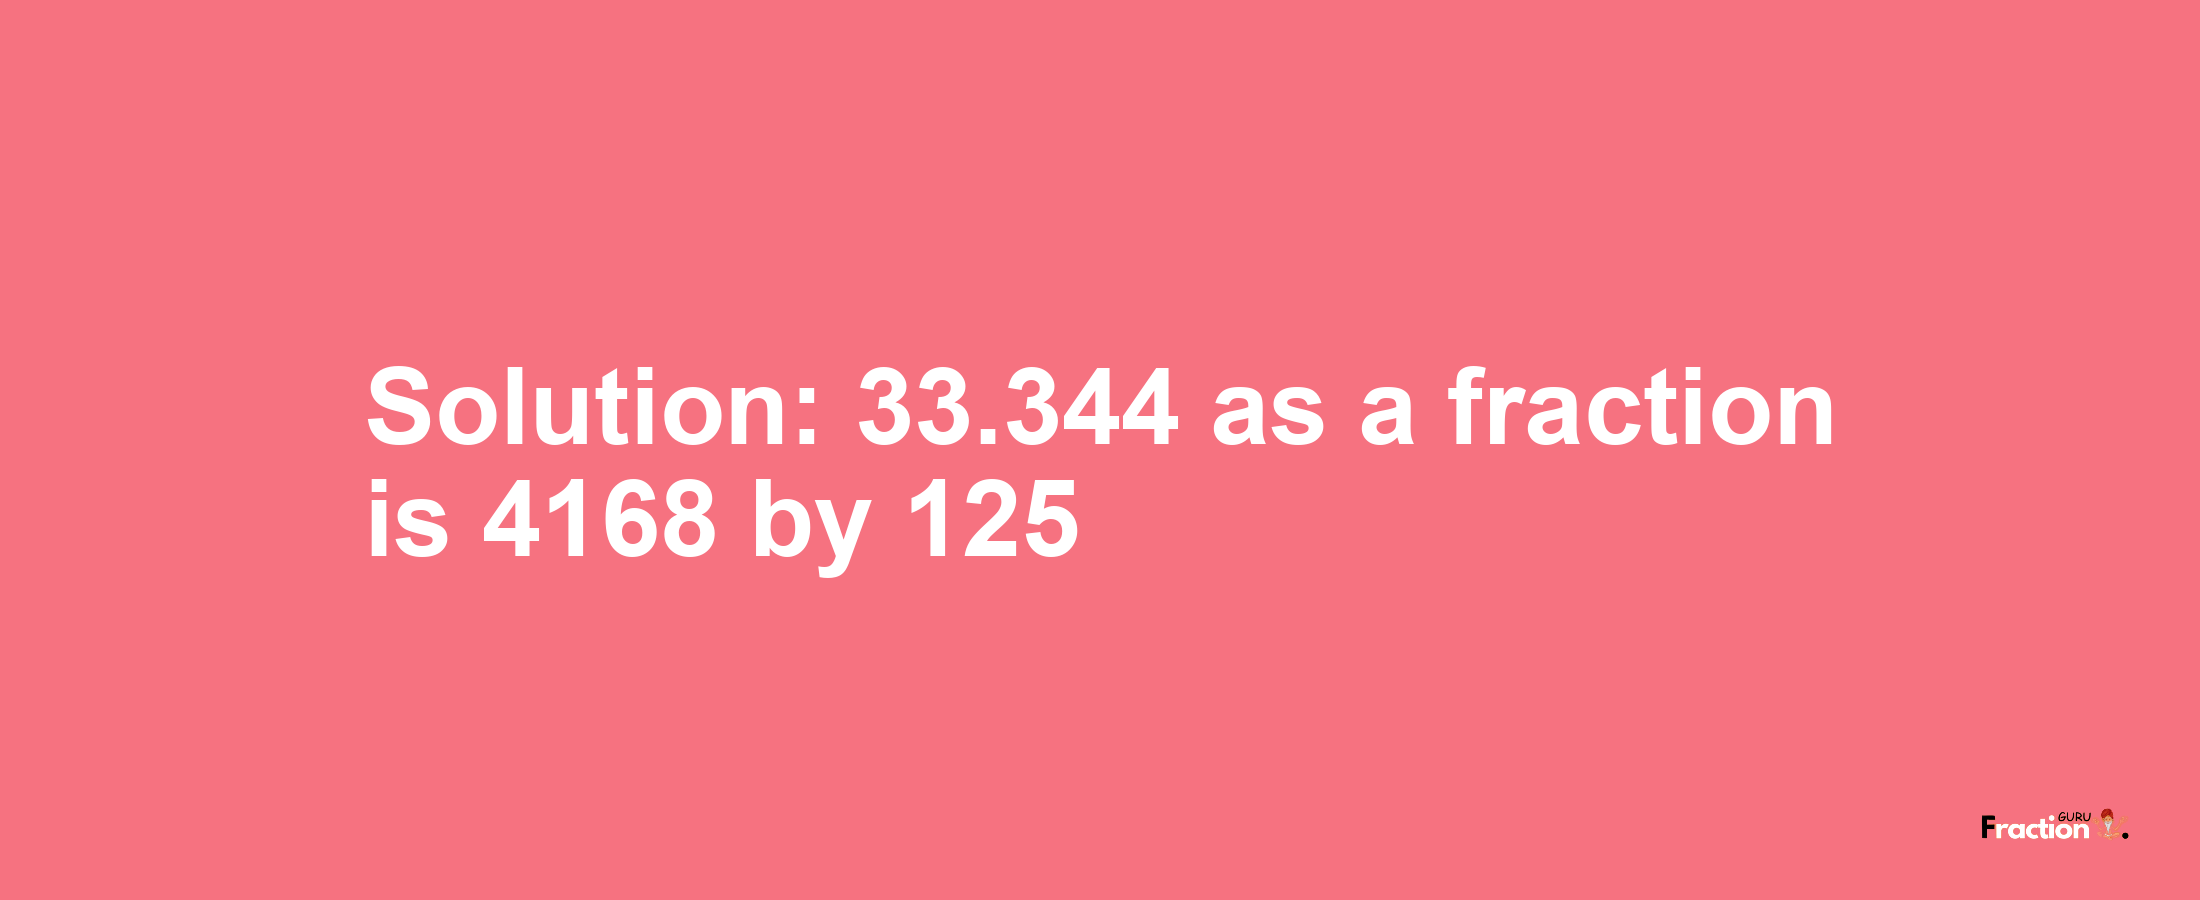 Solution:33.344 as a fraction is 4168/125